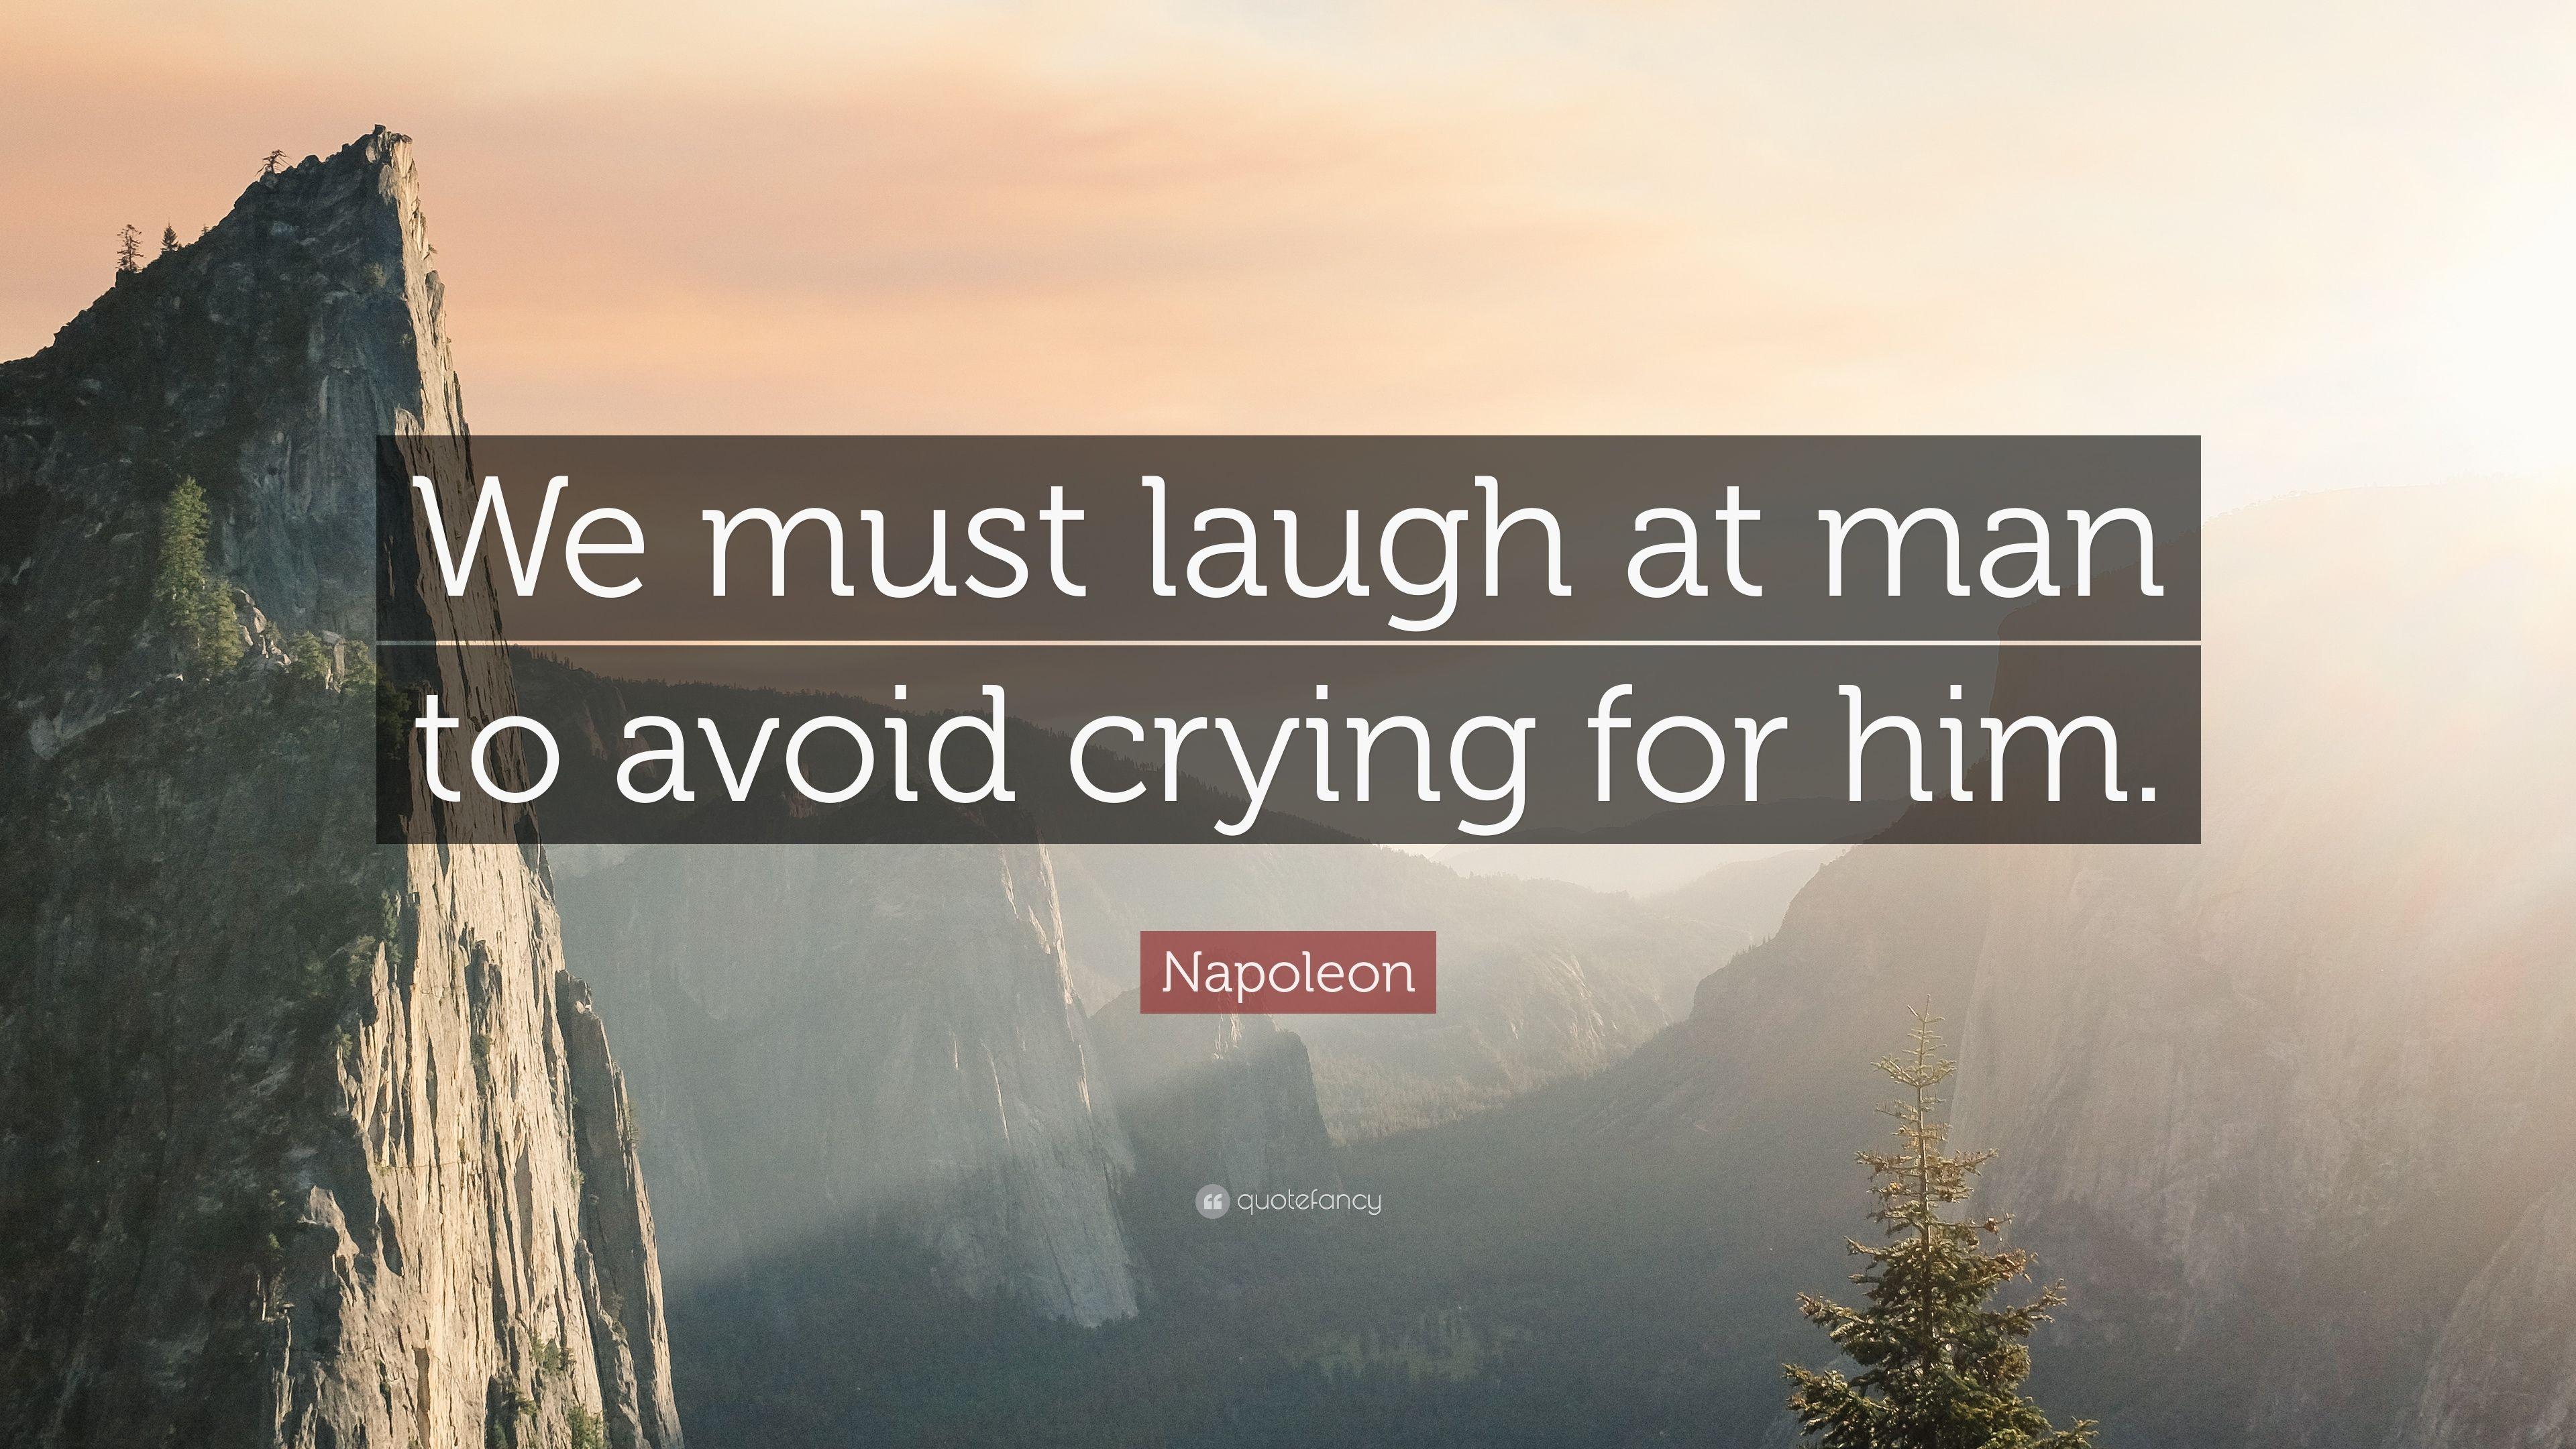 Napoleon Quote: “We must laugh at man to avoid crying for him.” 12